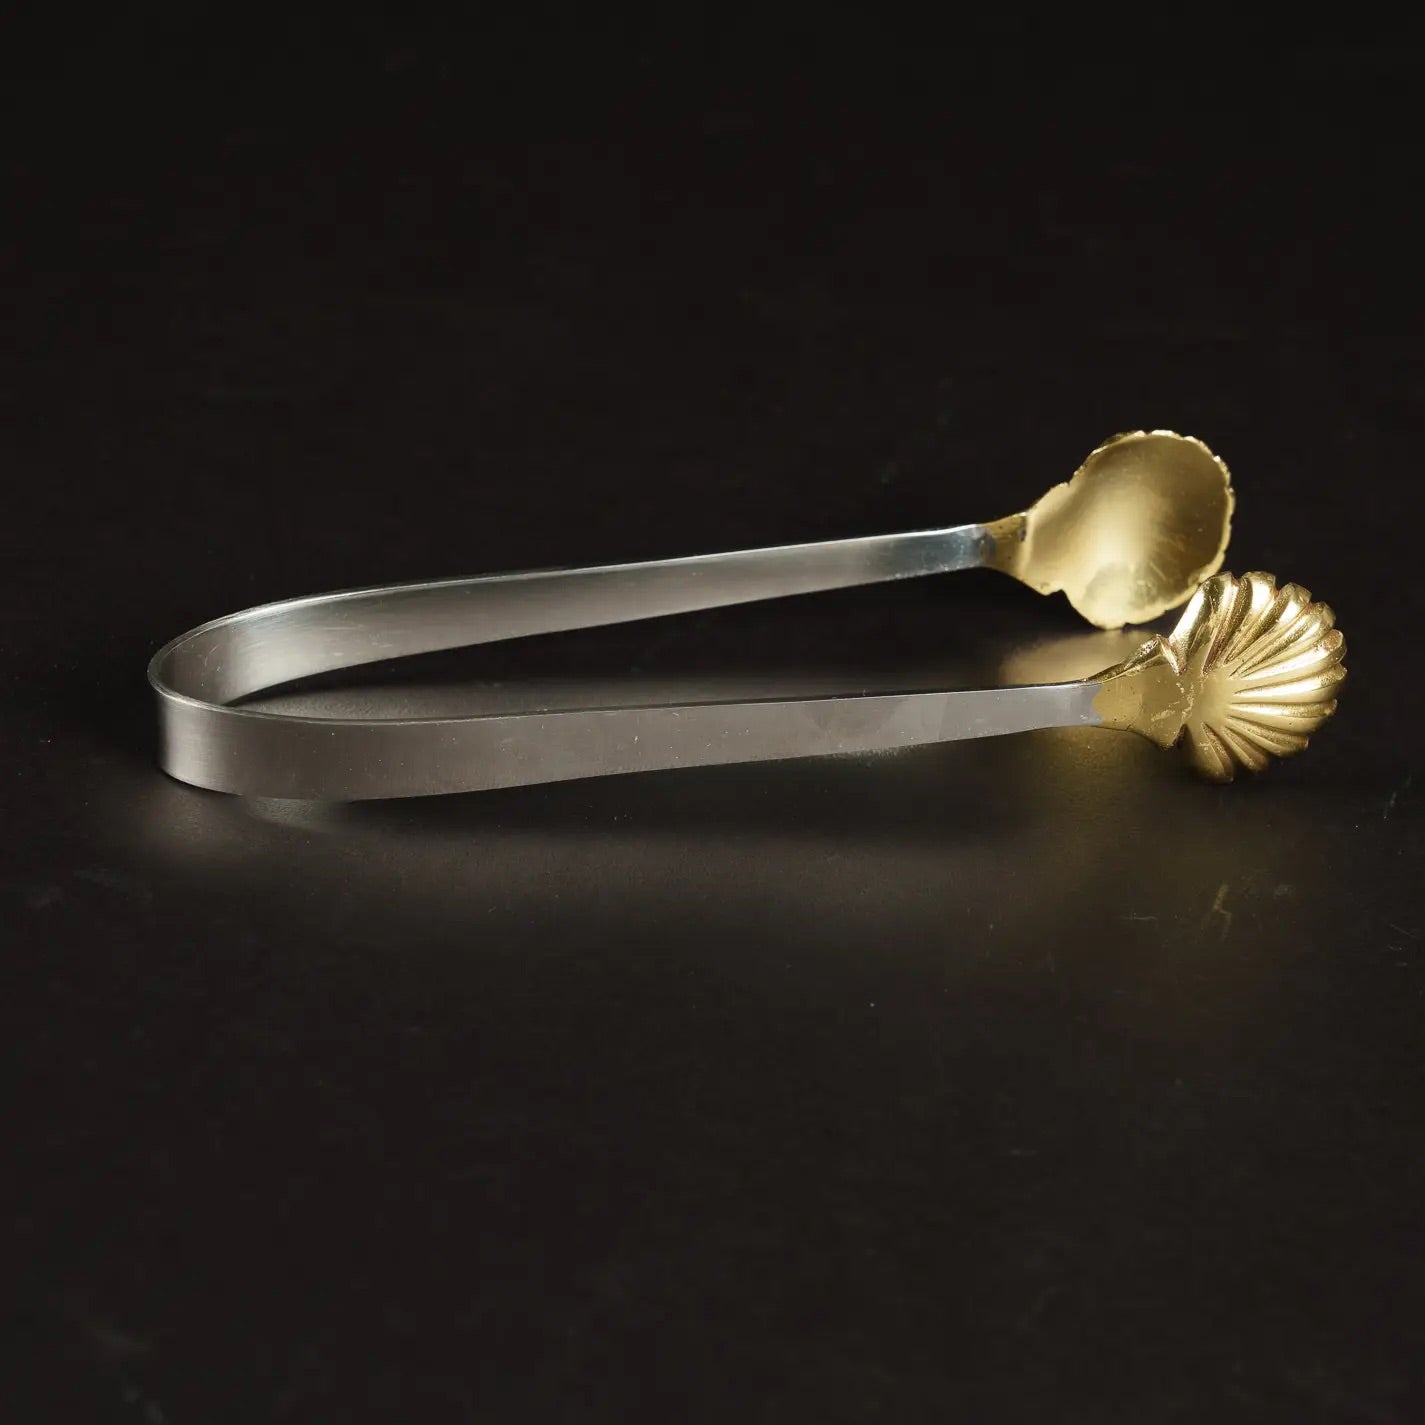 Cockle Shell Ice tongs